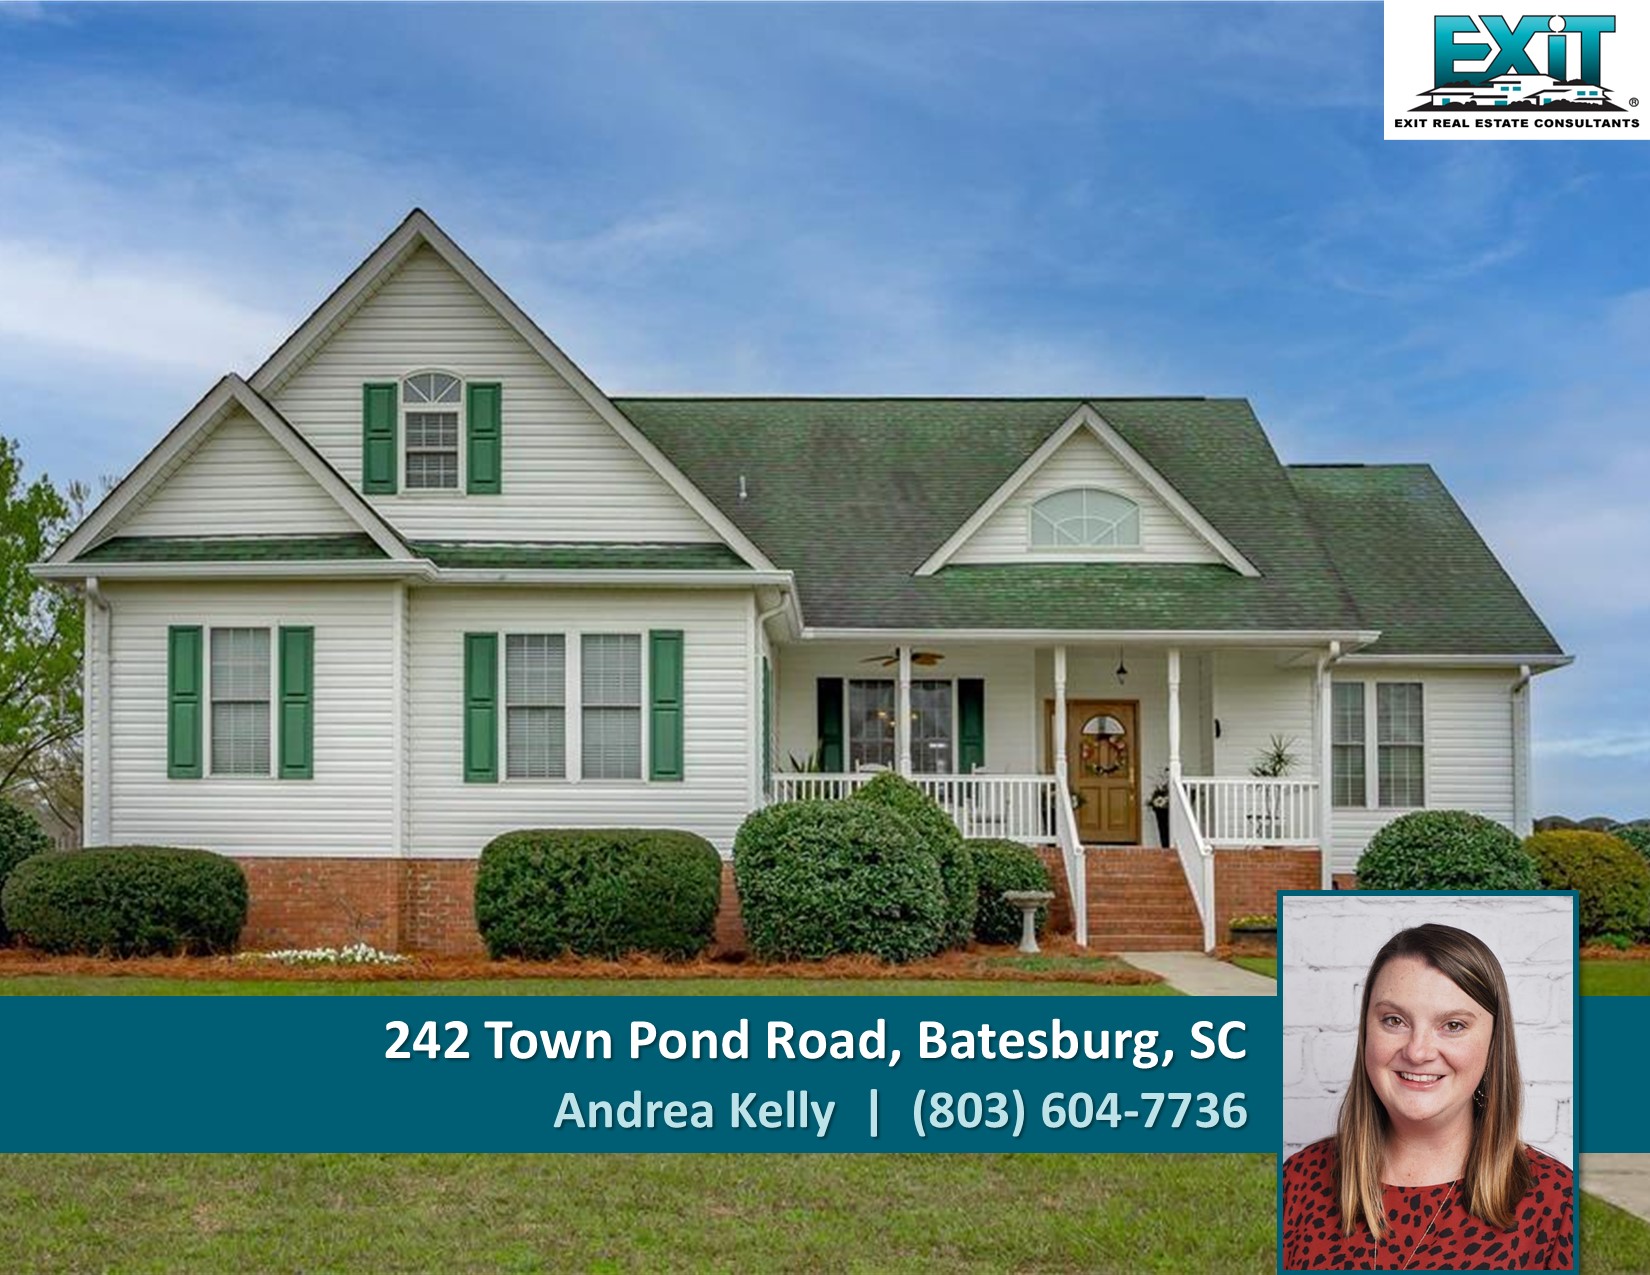 Just listed in Summerland - Batesburg